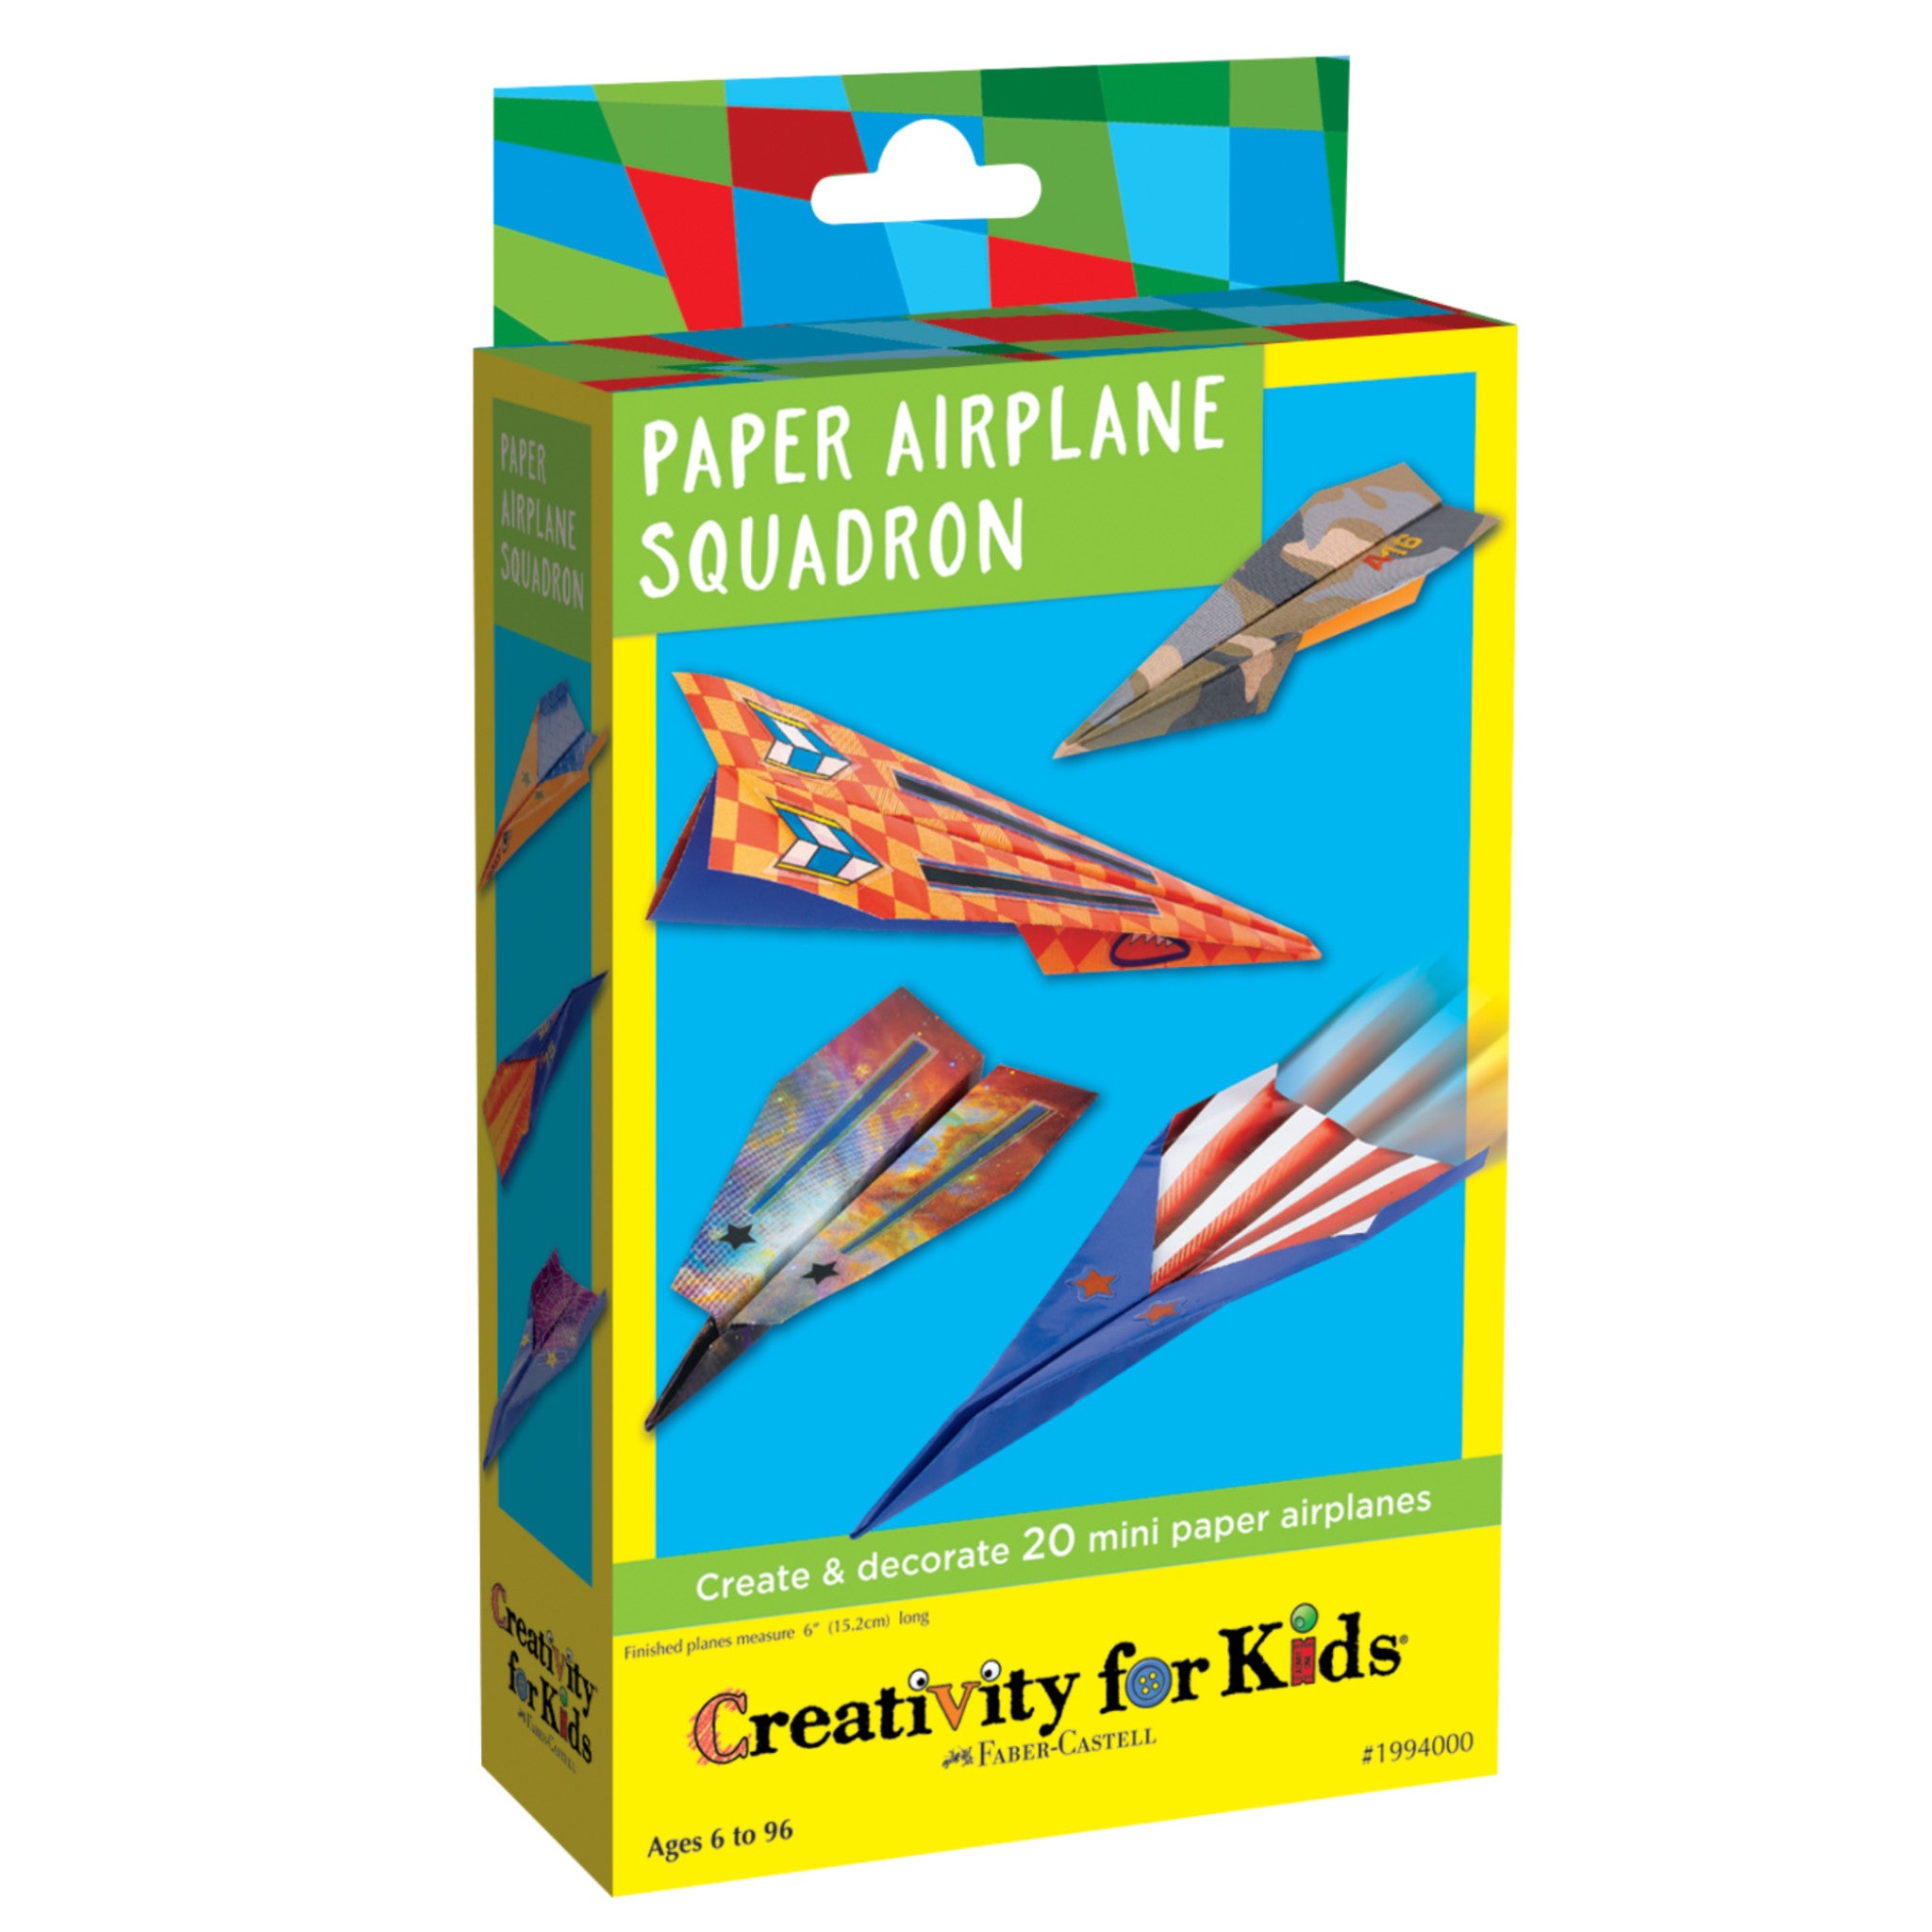 Creativity for Kids Paper Airplane Squadron - Create 20 Paper Airplanes,  Crafts for Boys and Girls, Stocking Stuffers and Gift for Boys, Kids